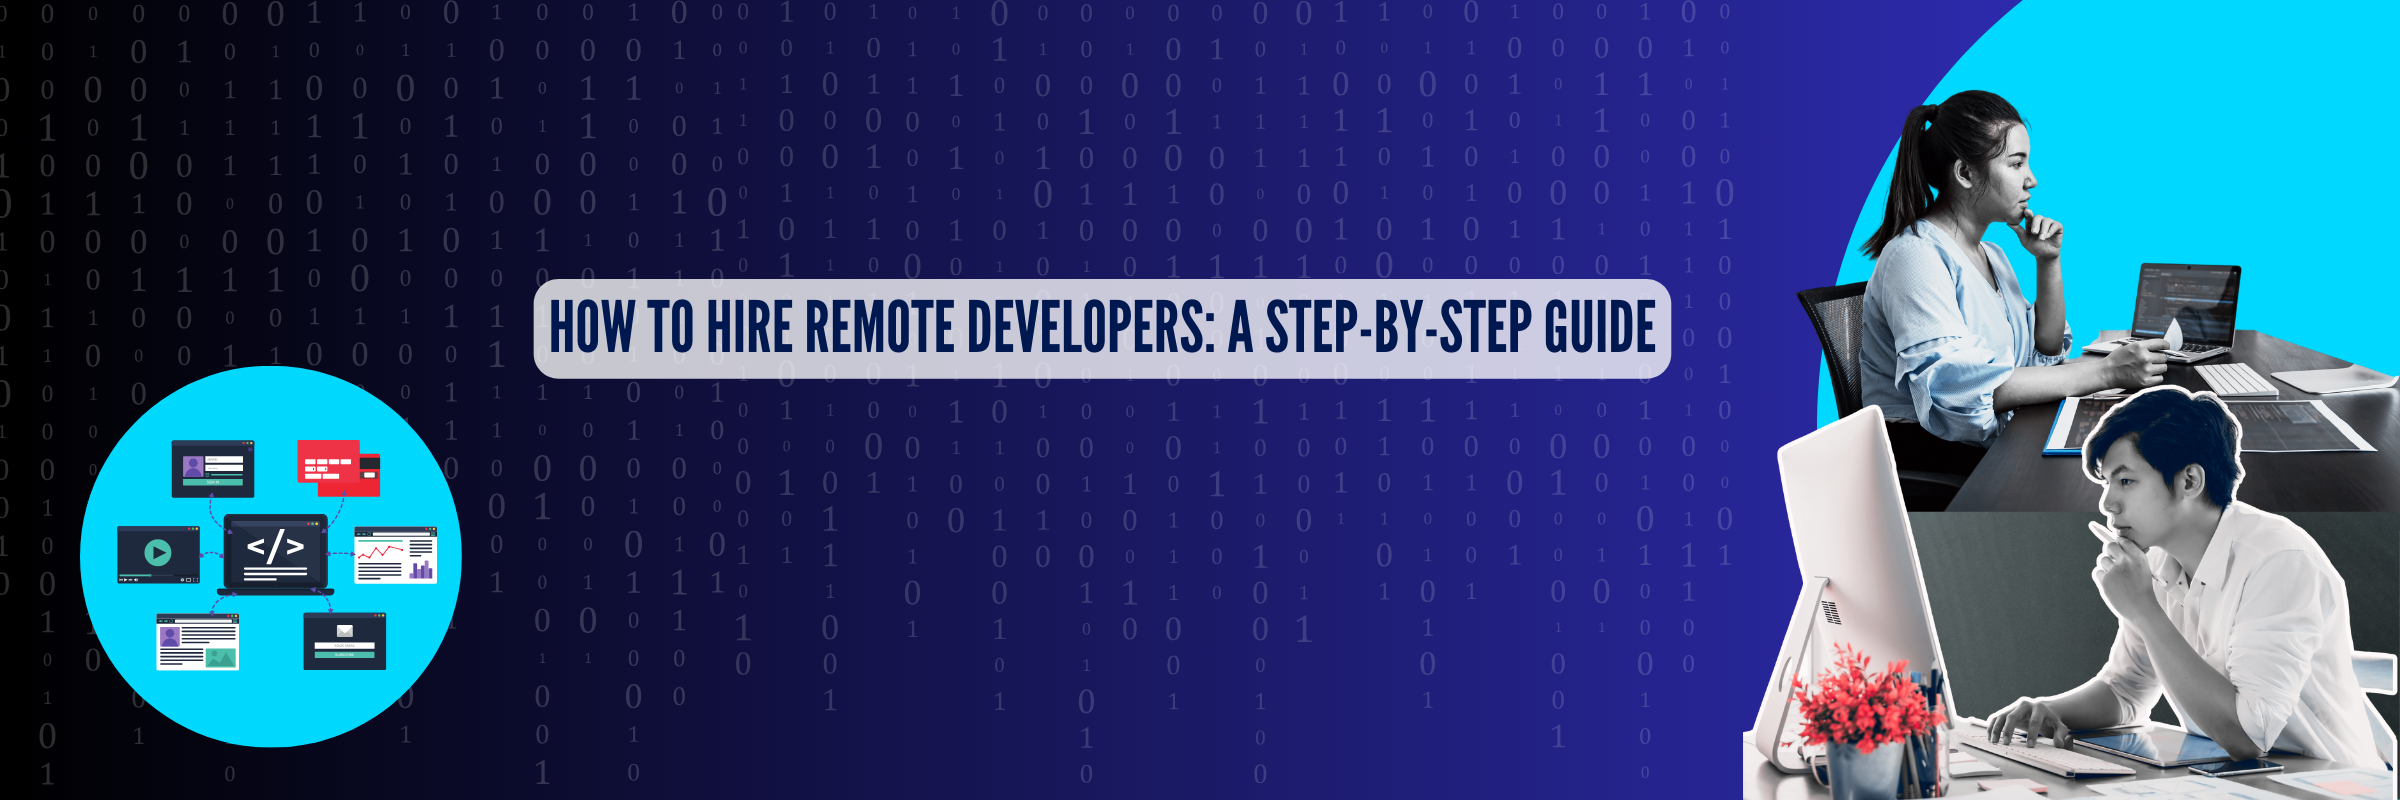 How To Hire Remote Developers: A Step-By-Step Guide